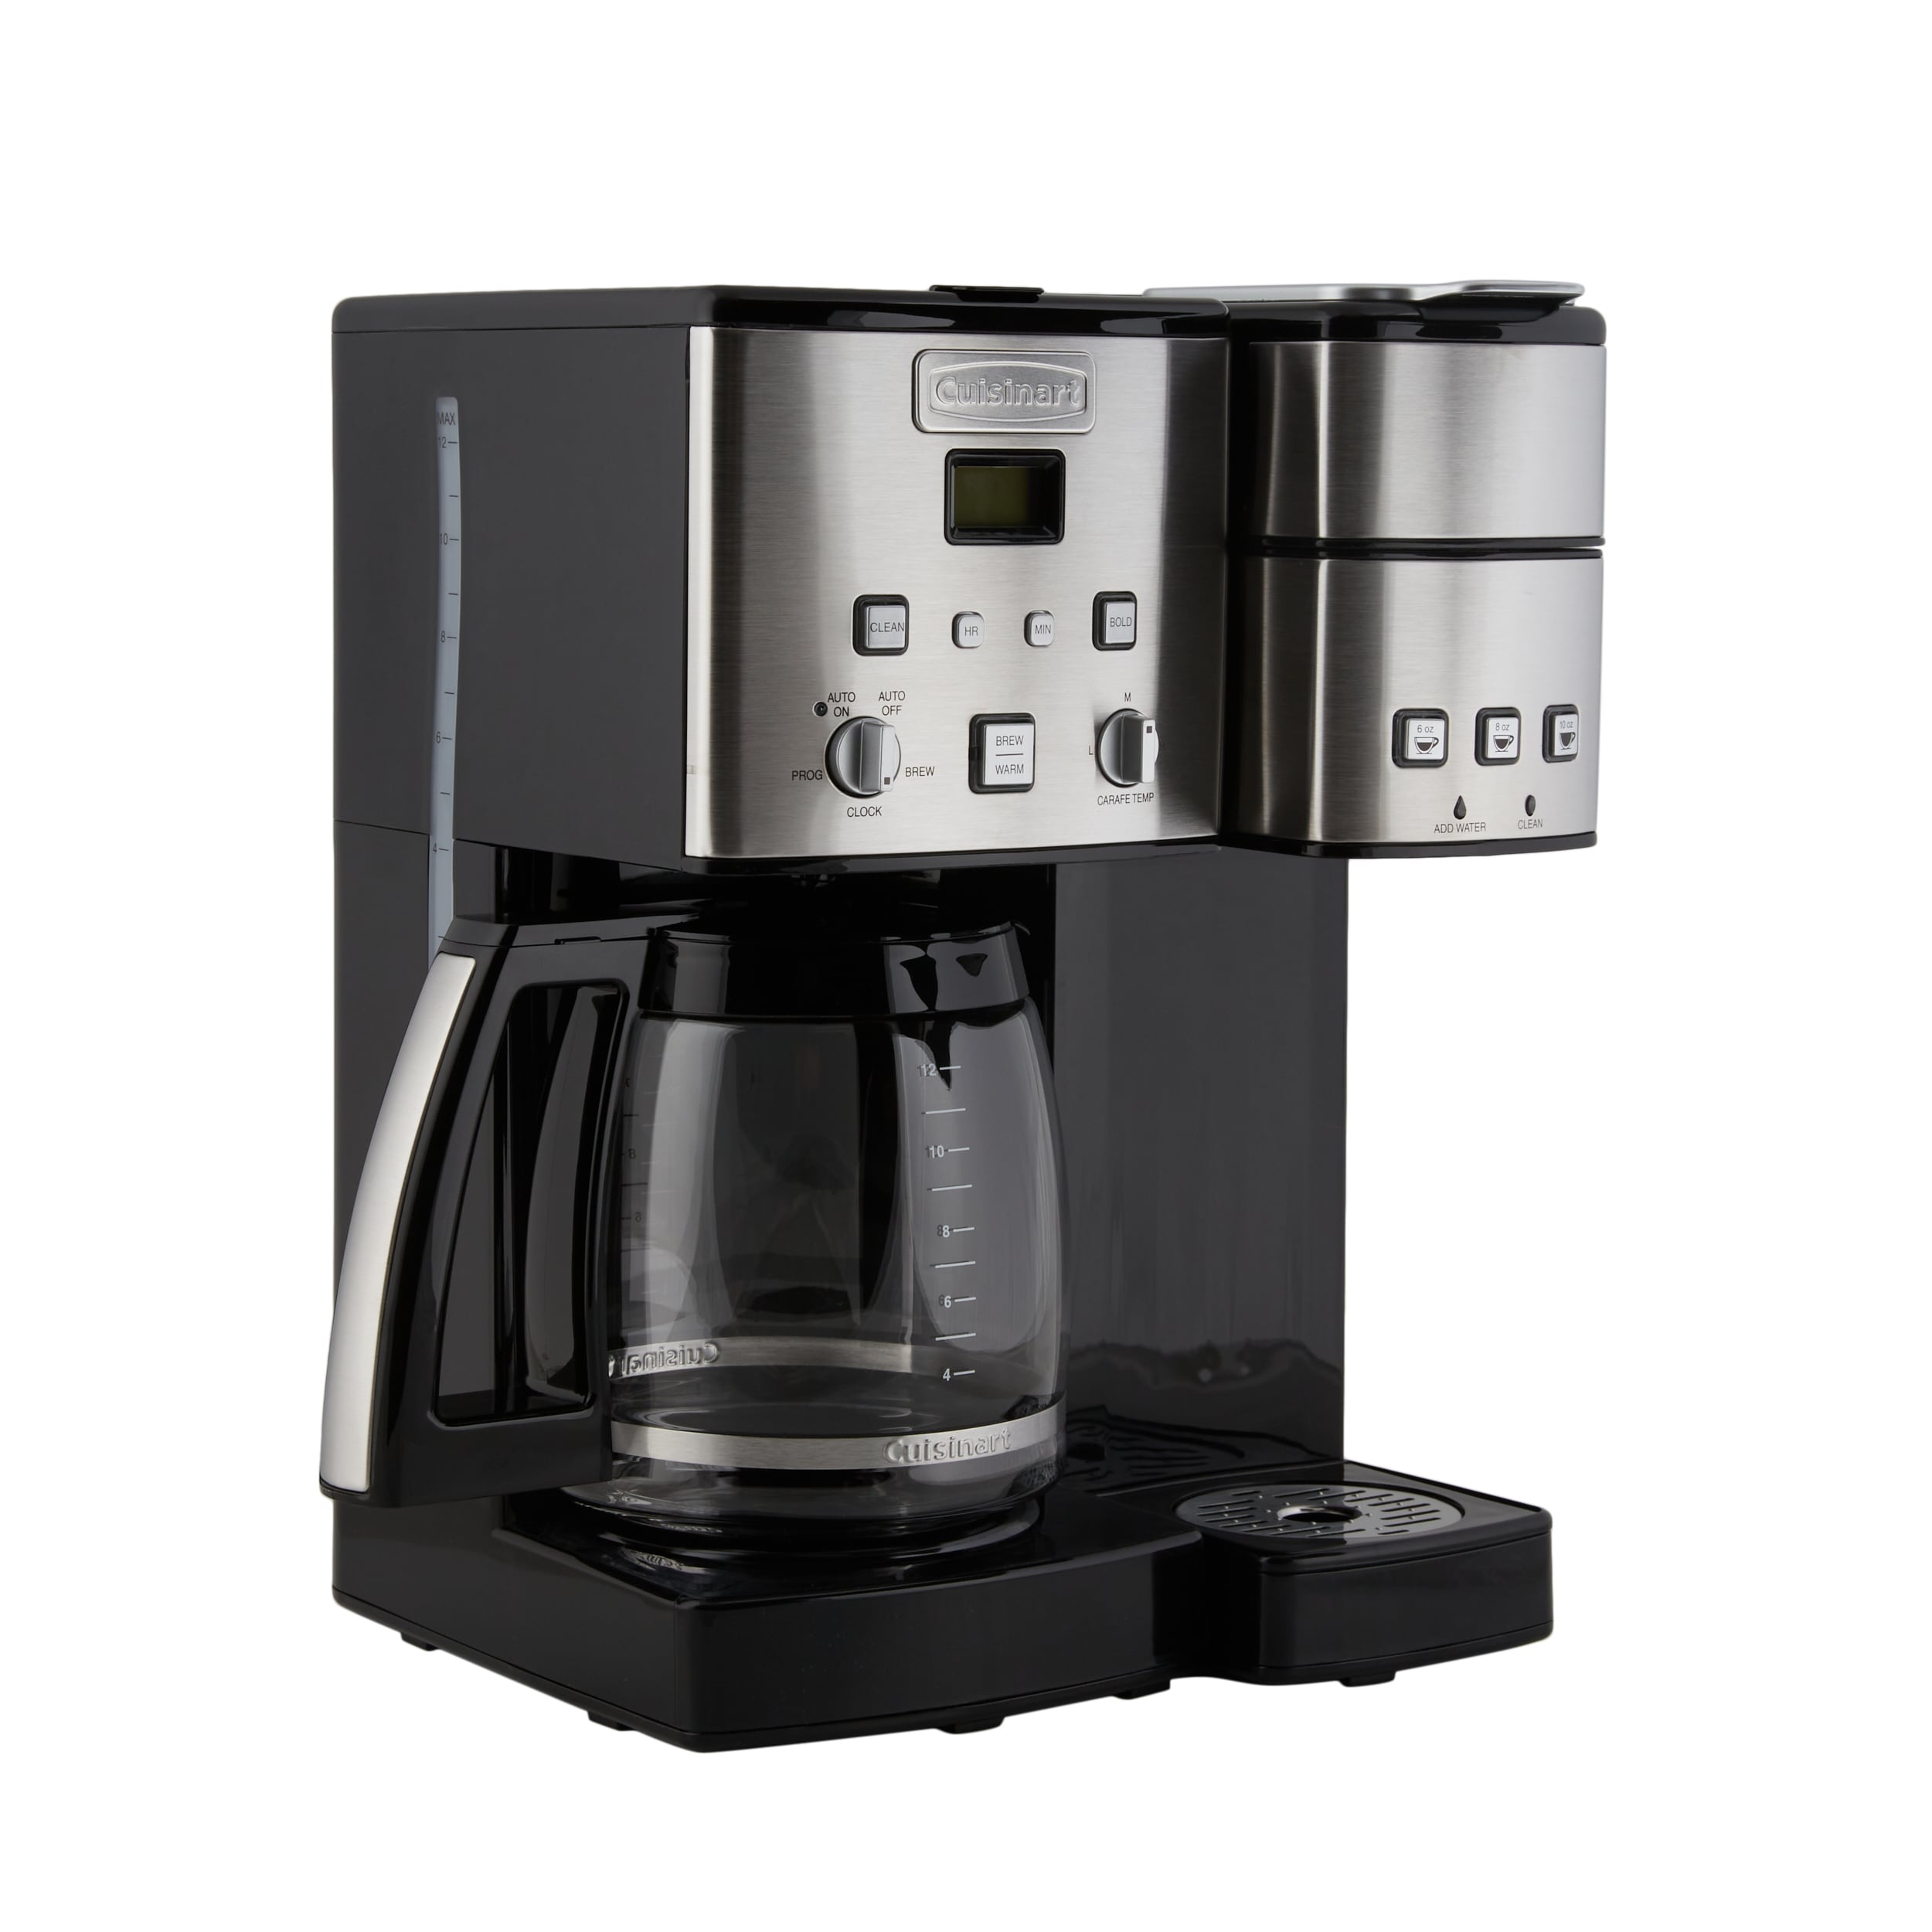 12-Cup Stainless Steel Coffee Maker - Coffee Makers - Presto®